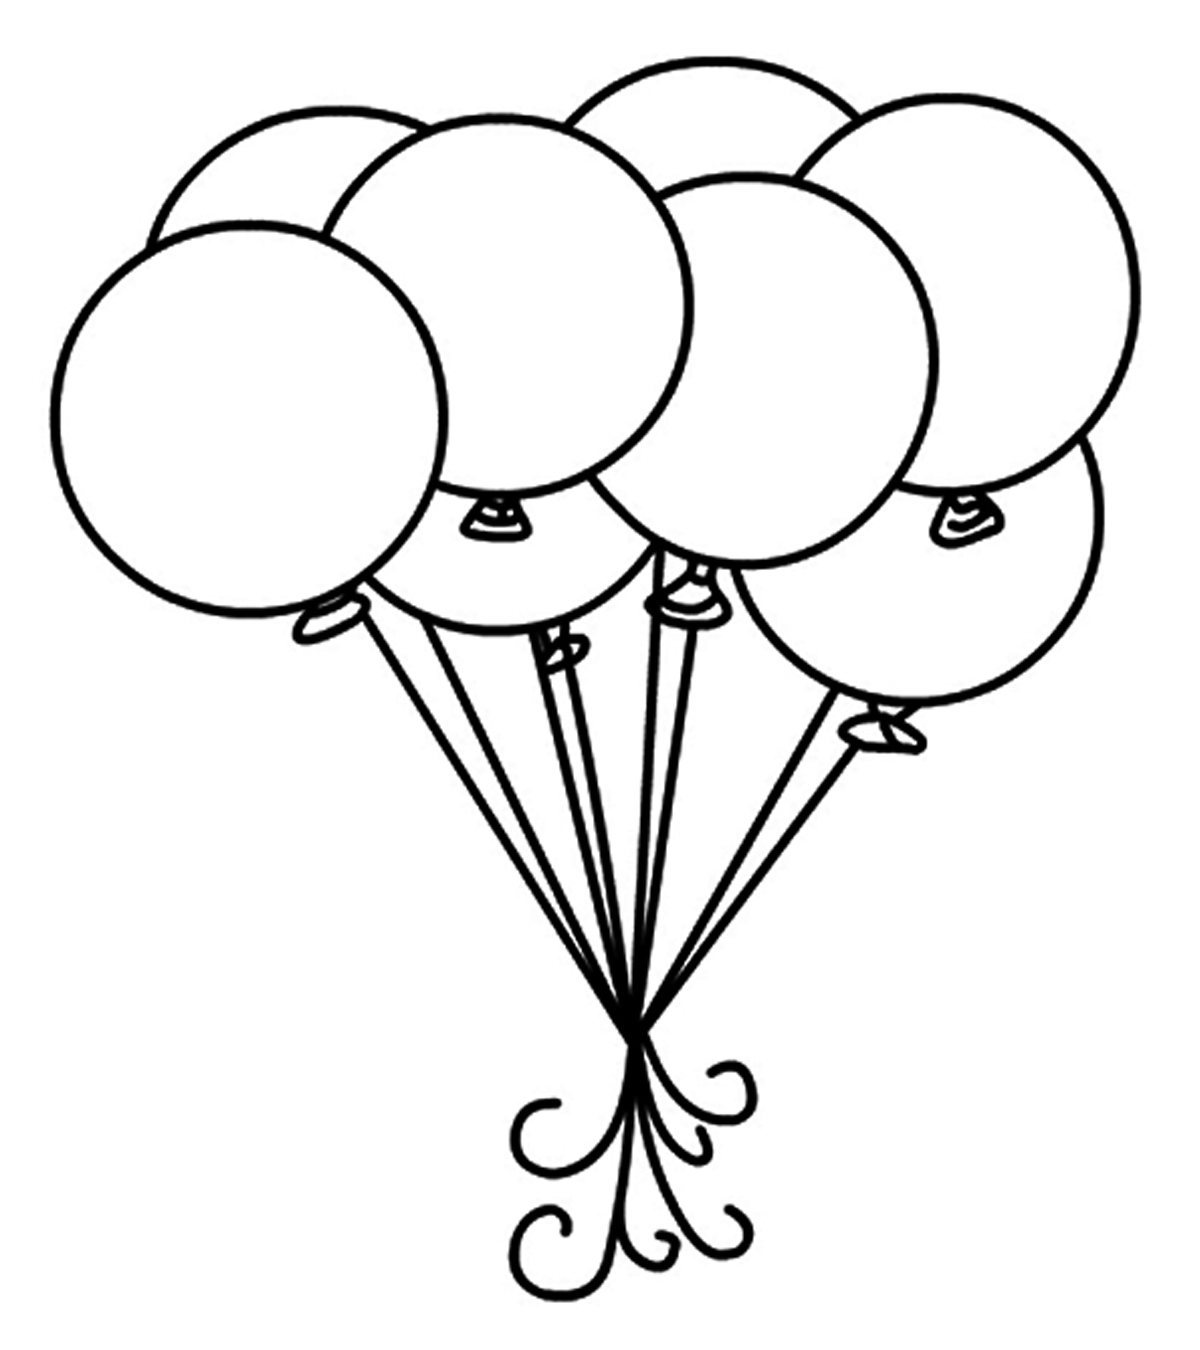 Balloon Coloring Pages free Printable